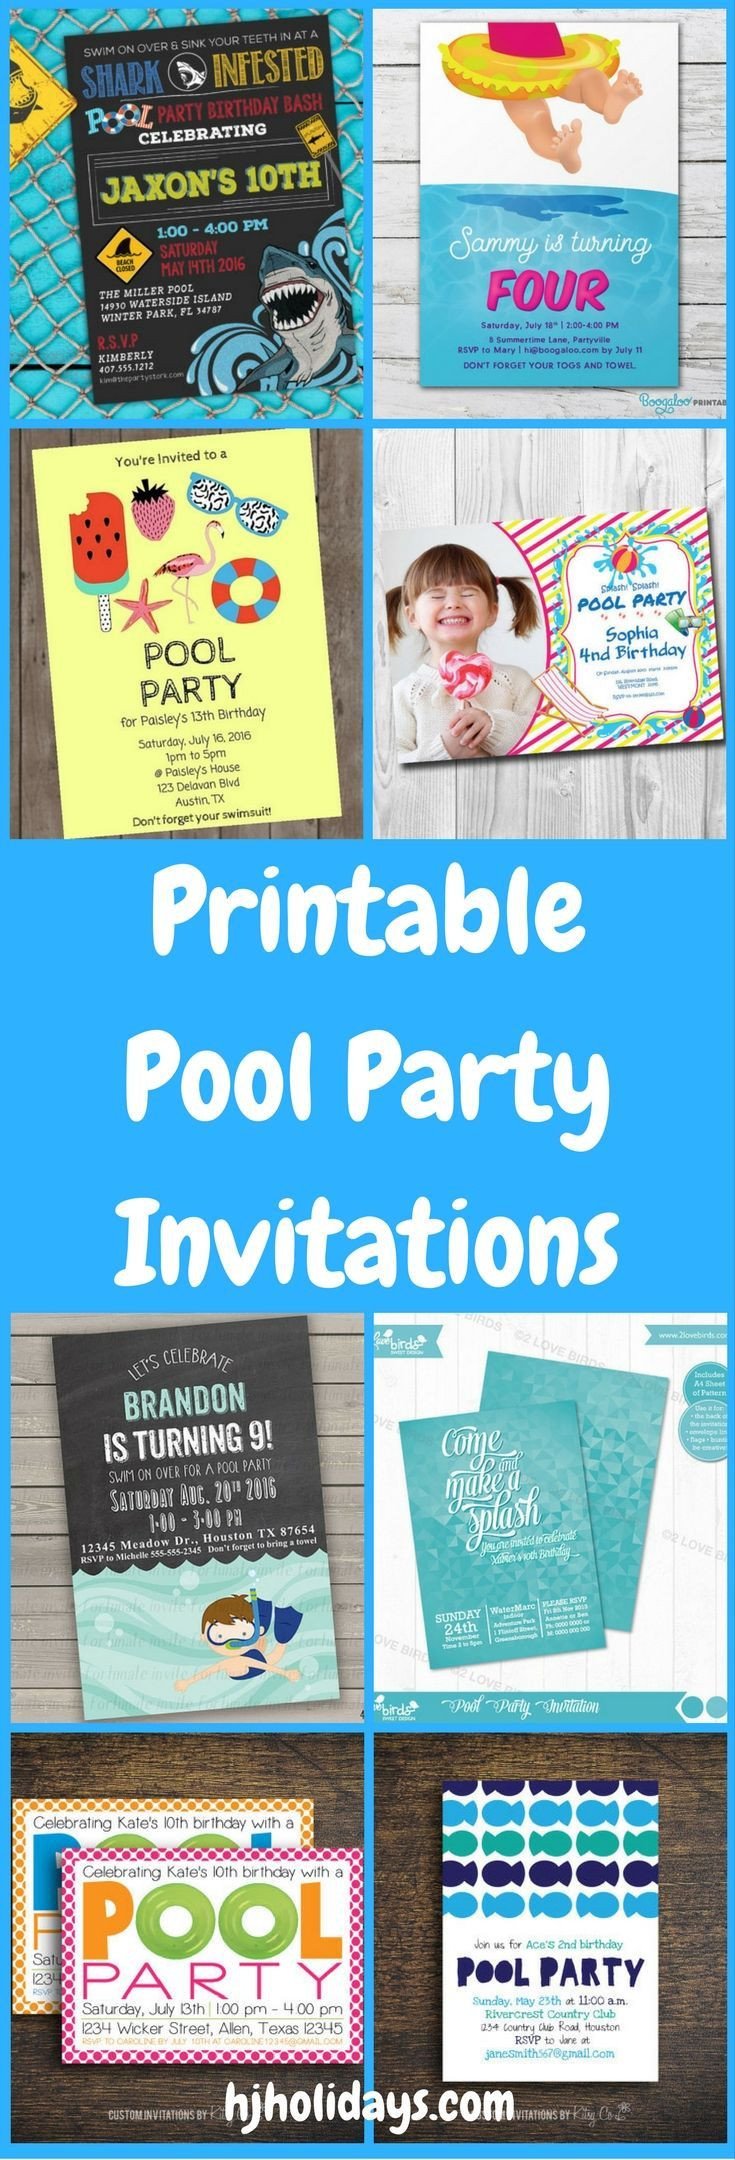 Printable Pool Party Invitations for Kids